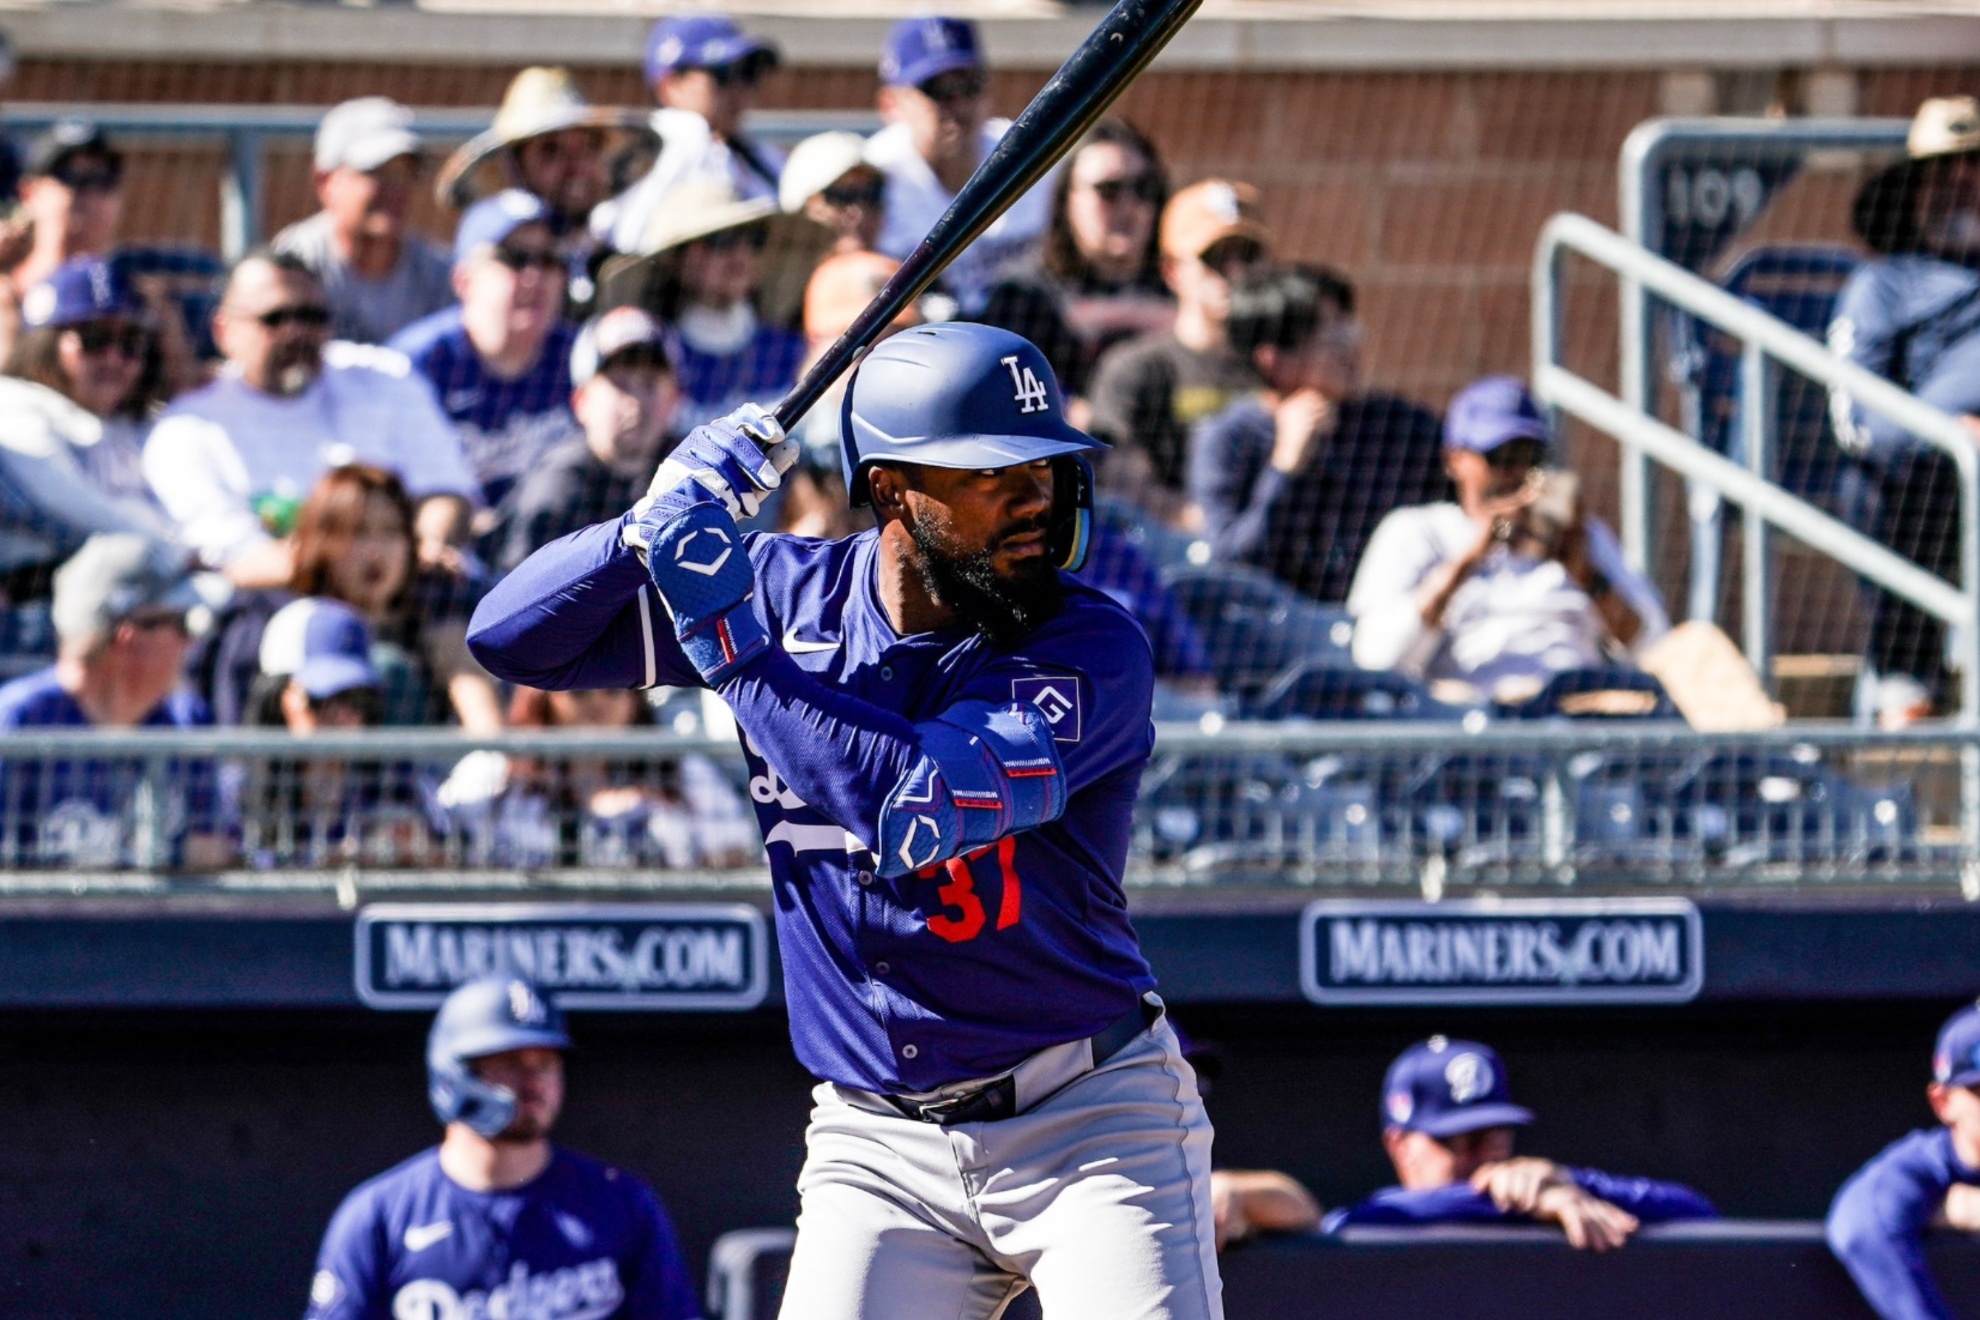 The Los Angeles Dodgers won their first spring training game 14-1 against the San Diego Padres